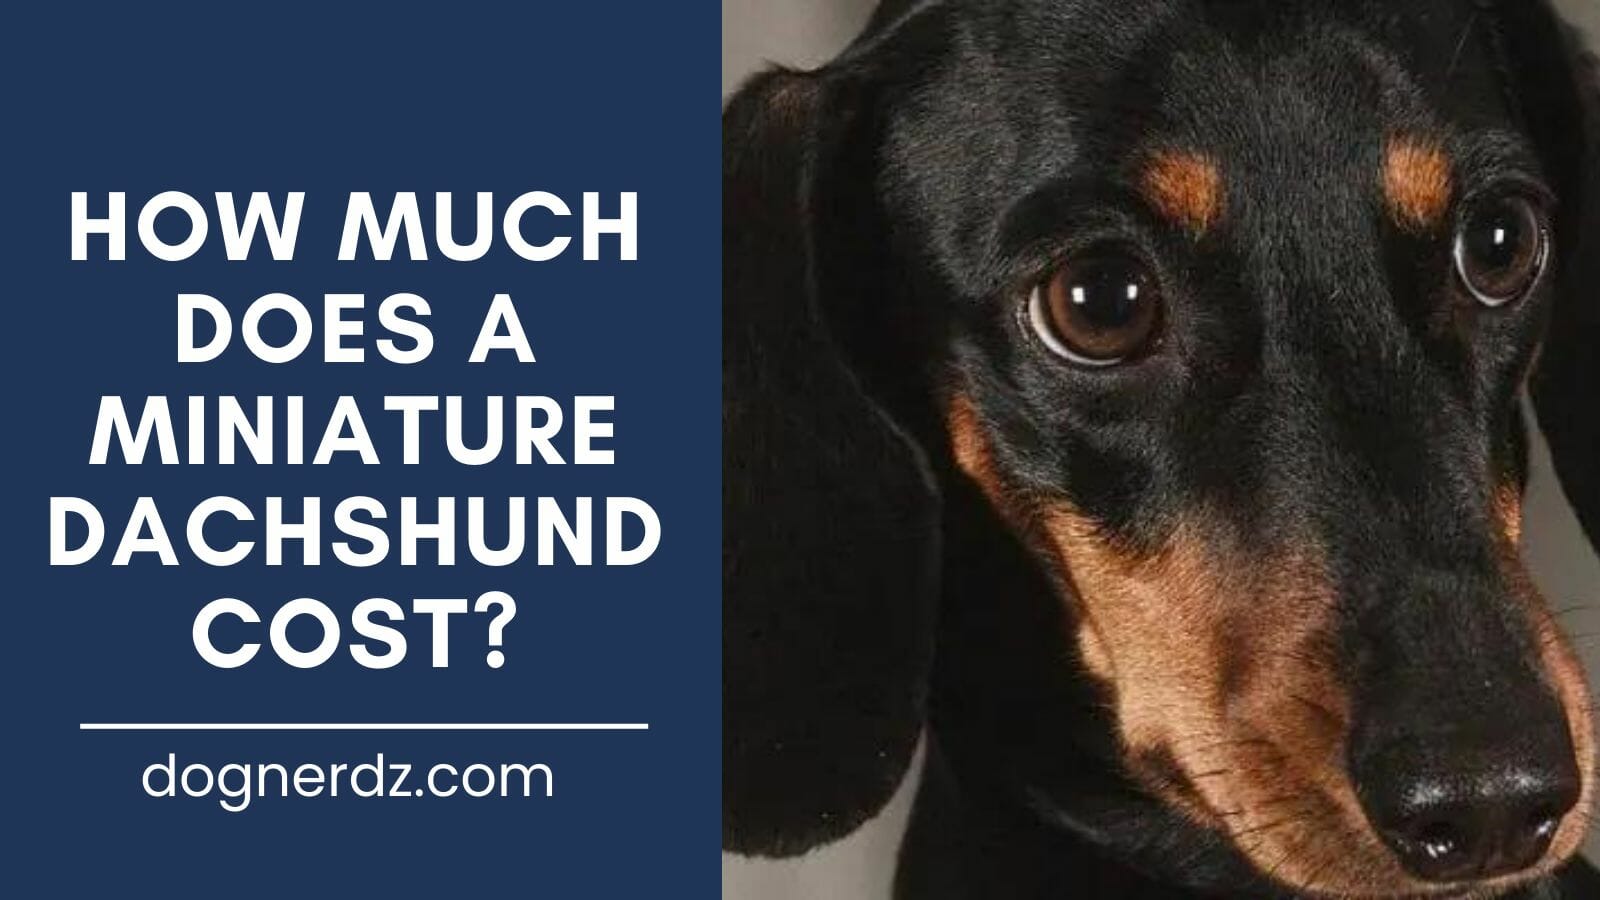 review of how much does a miniature dachshund cost